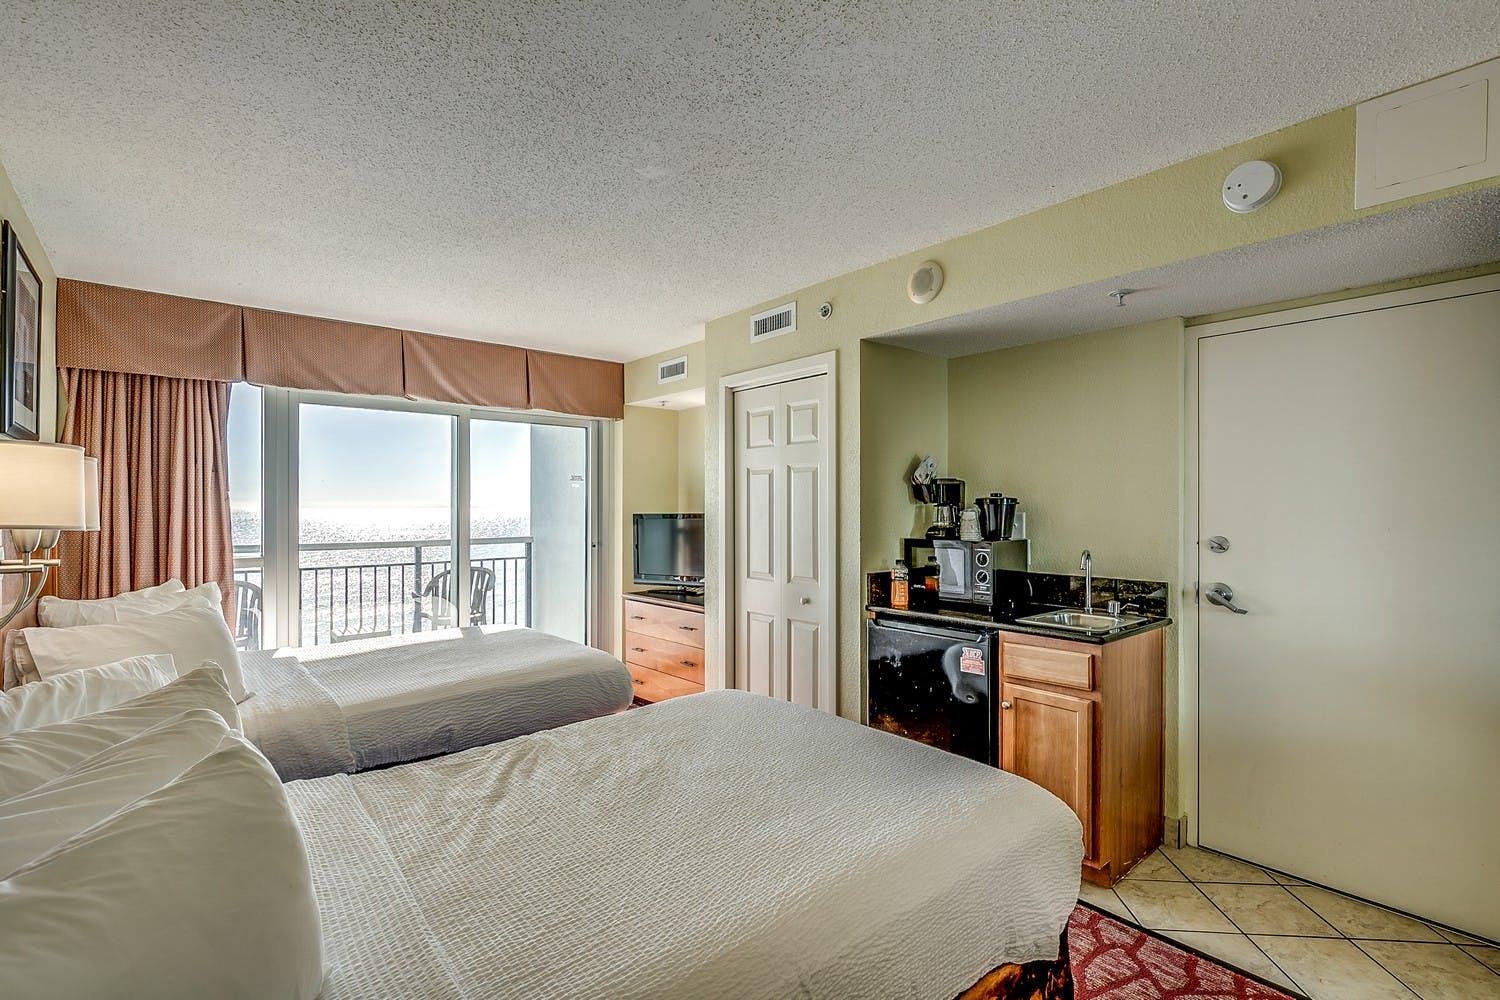 Bay View on the Boardwalk - 2 Bedroom Oceanfront Condo - E